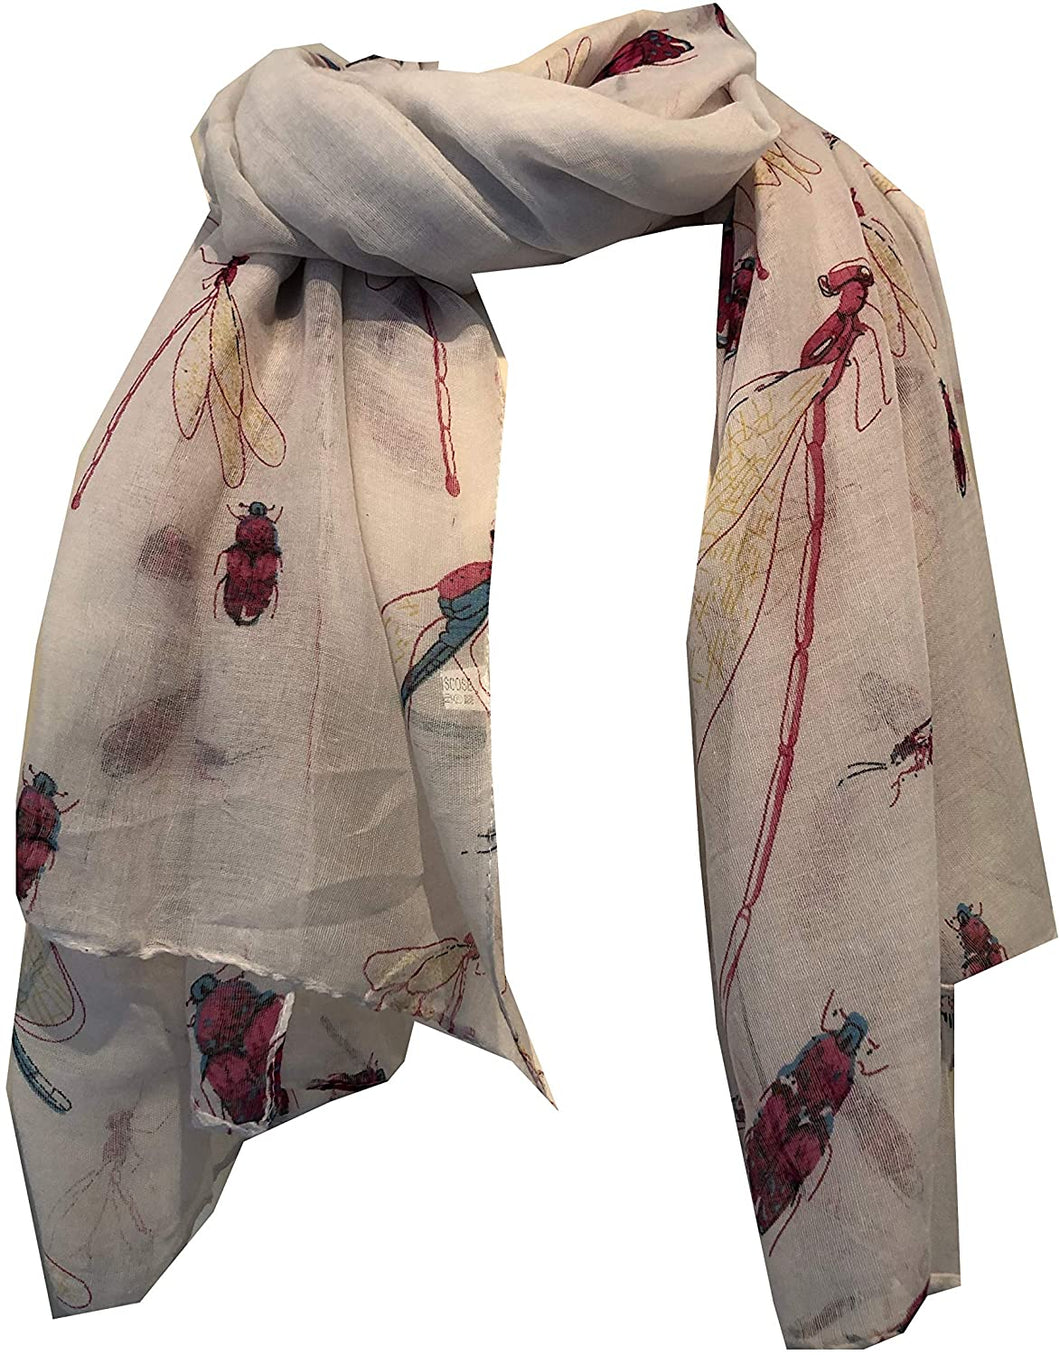 Pamper Yourself Now Creamy White with Dragonfly and Bugs Design Long Soft Scarf, Great Present/Gift.